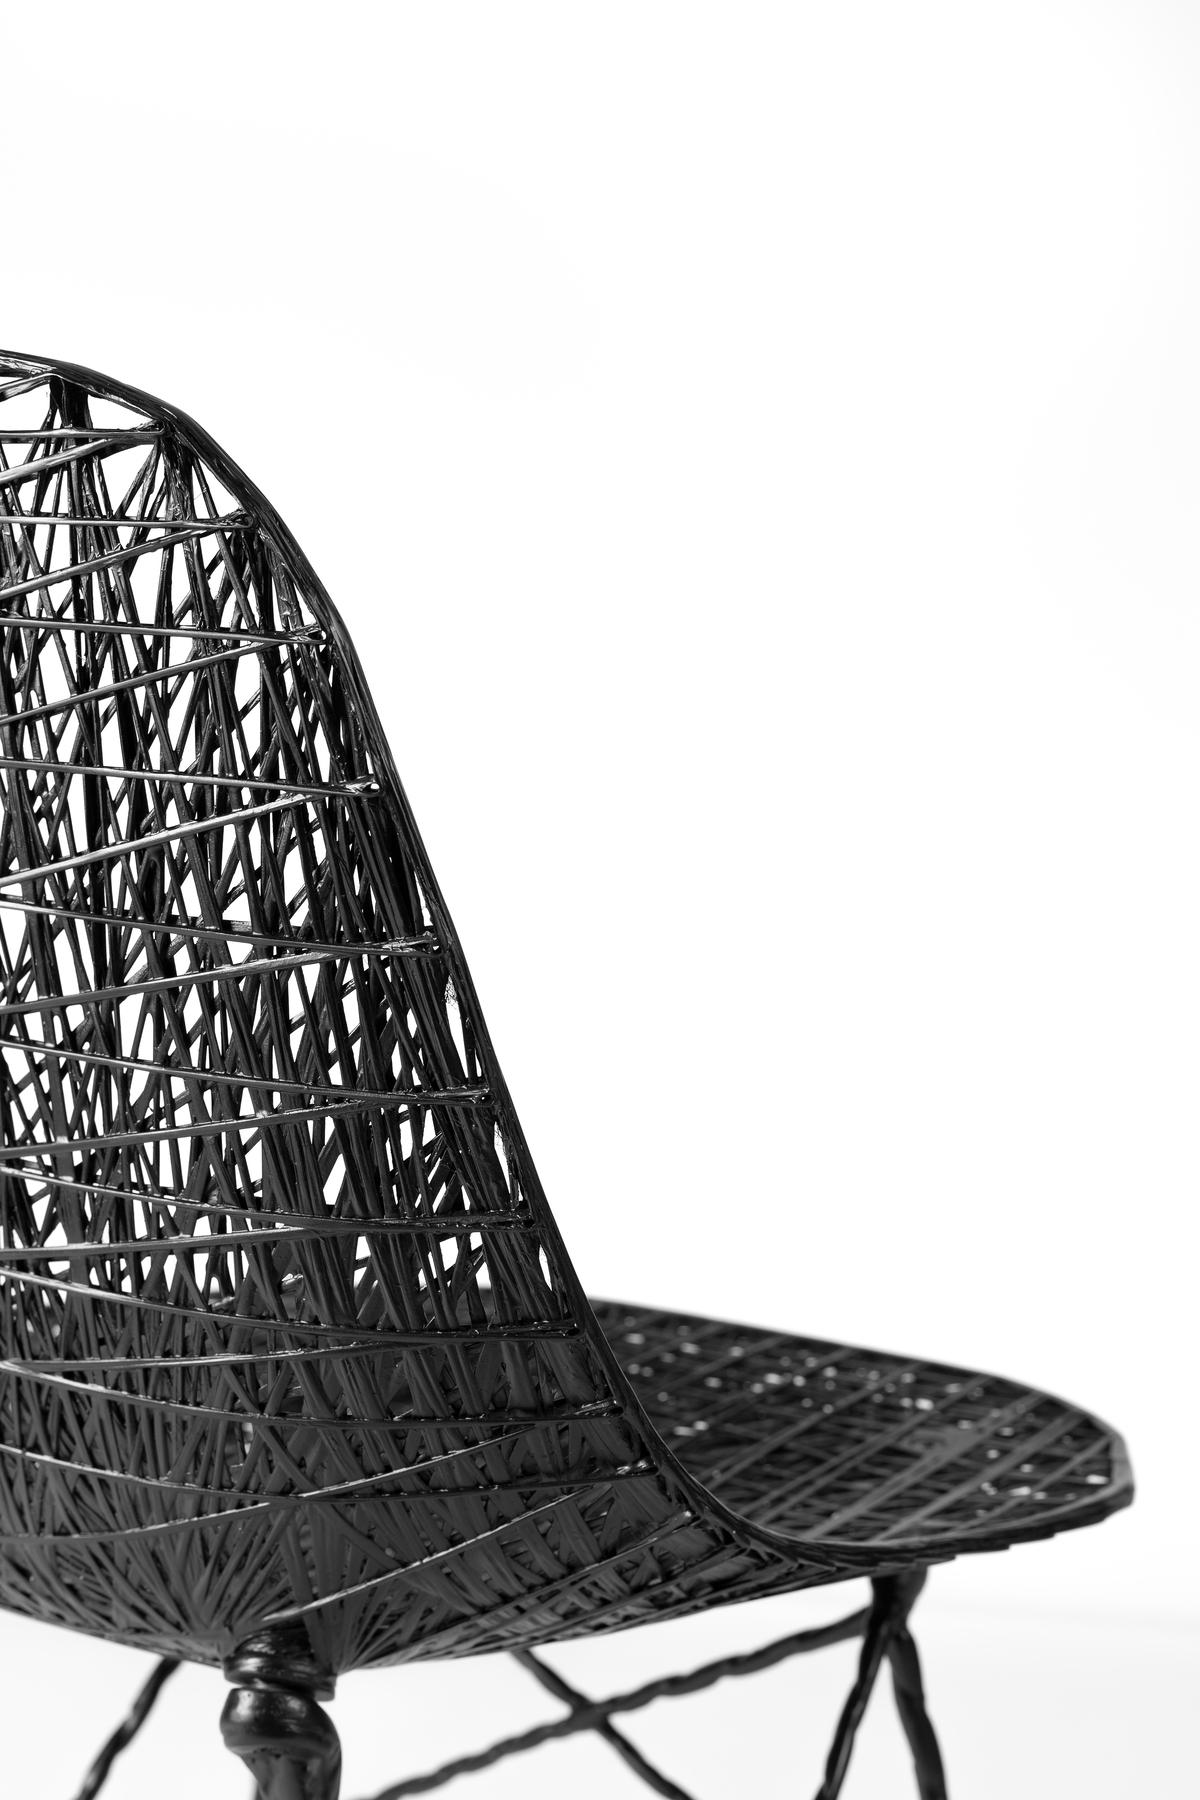 Moooi Carbon Chair in Black Fiber with Epoxy Resin by Bertjan Pot For Sale 5